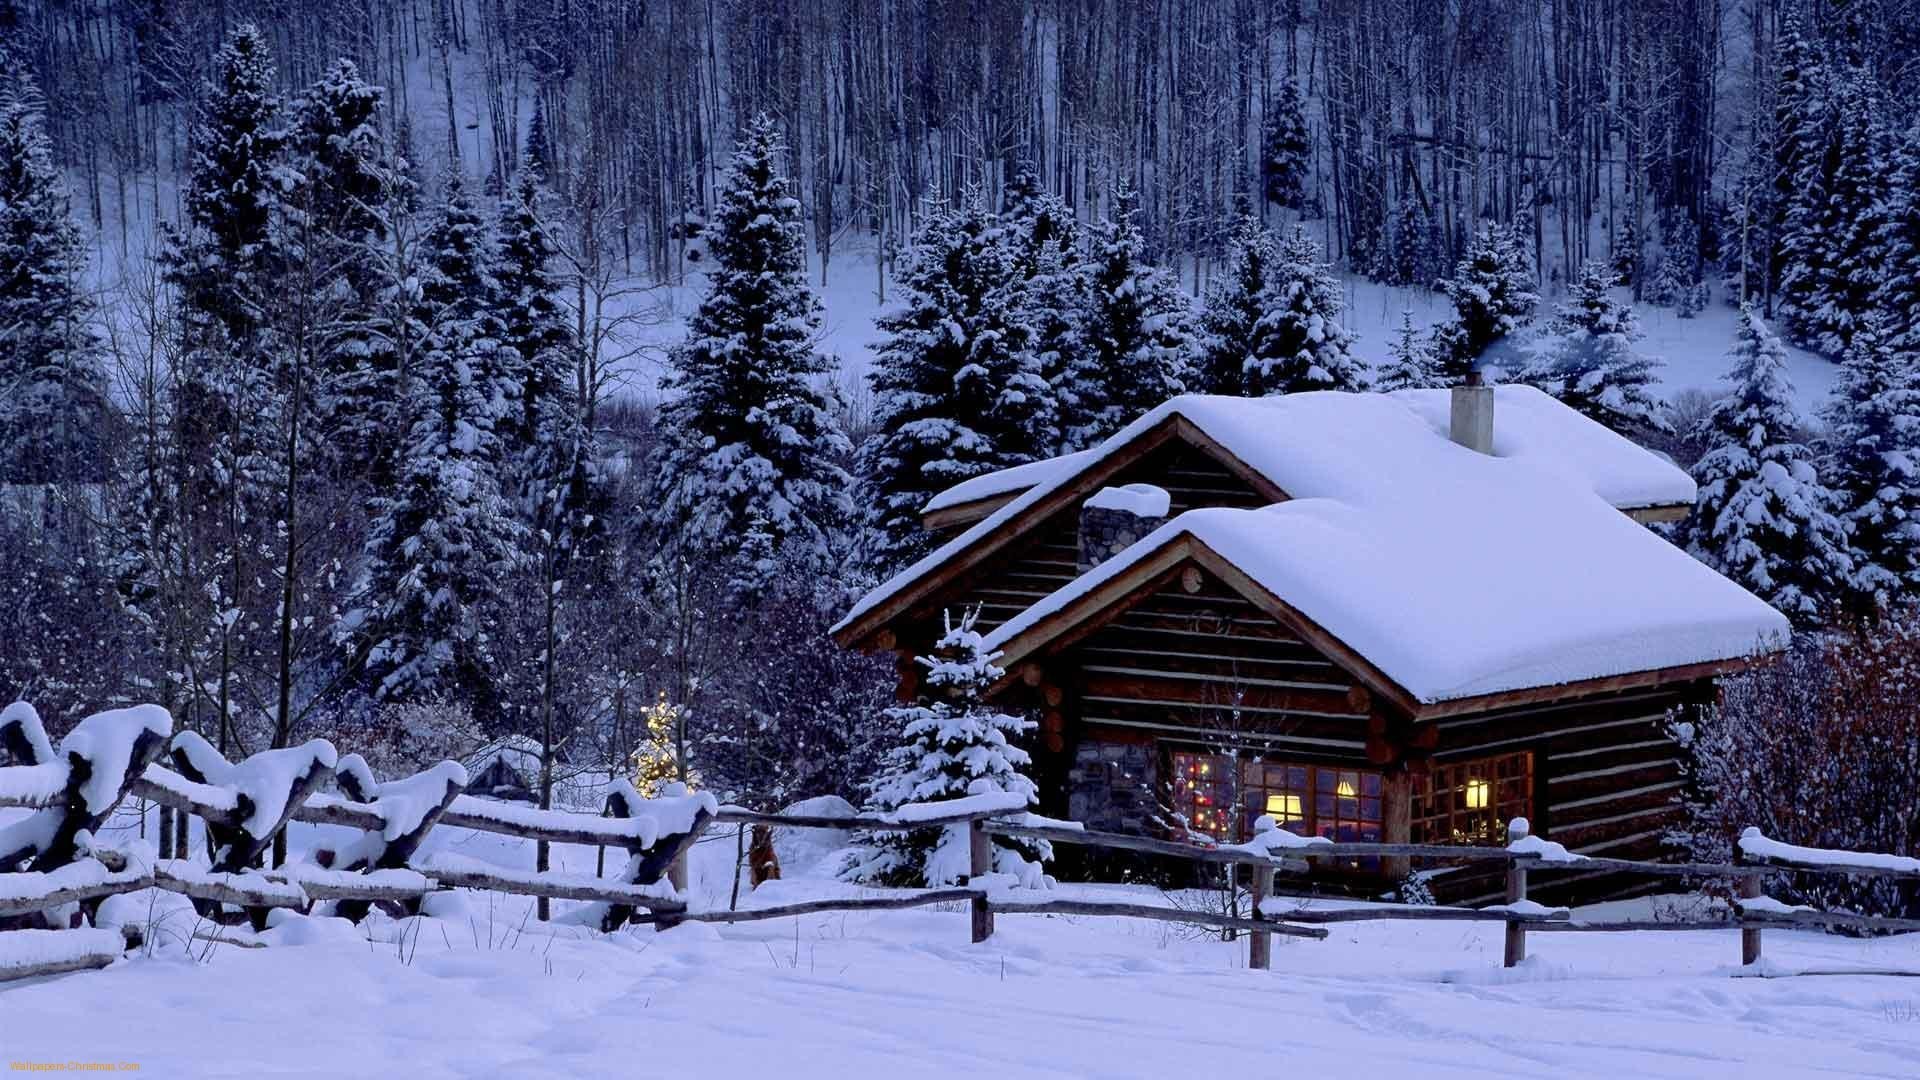 1920x1080 Christmas Tag - Christmas Cabins Woods Mountain Eve Forest Winter Picture  Desktop Background for HD 16